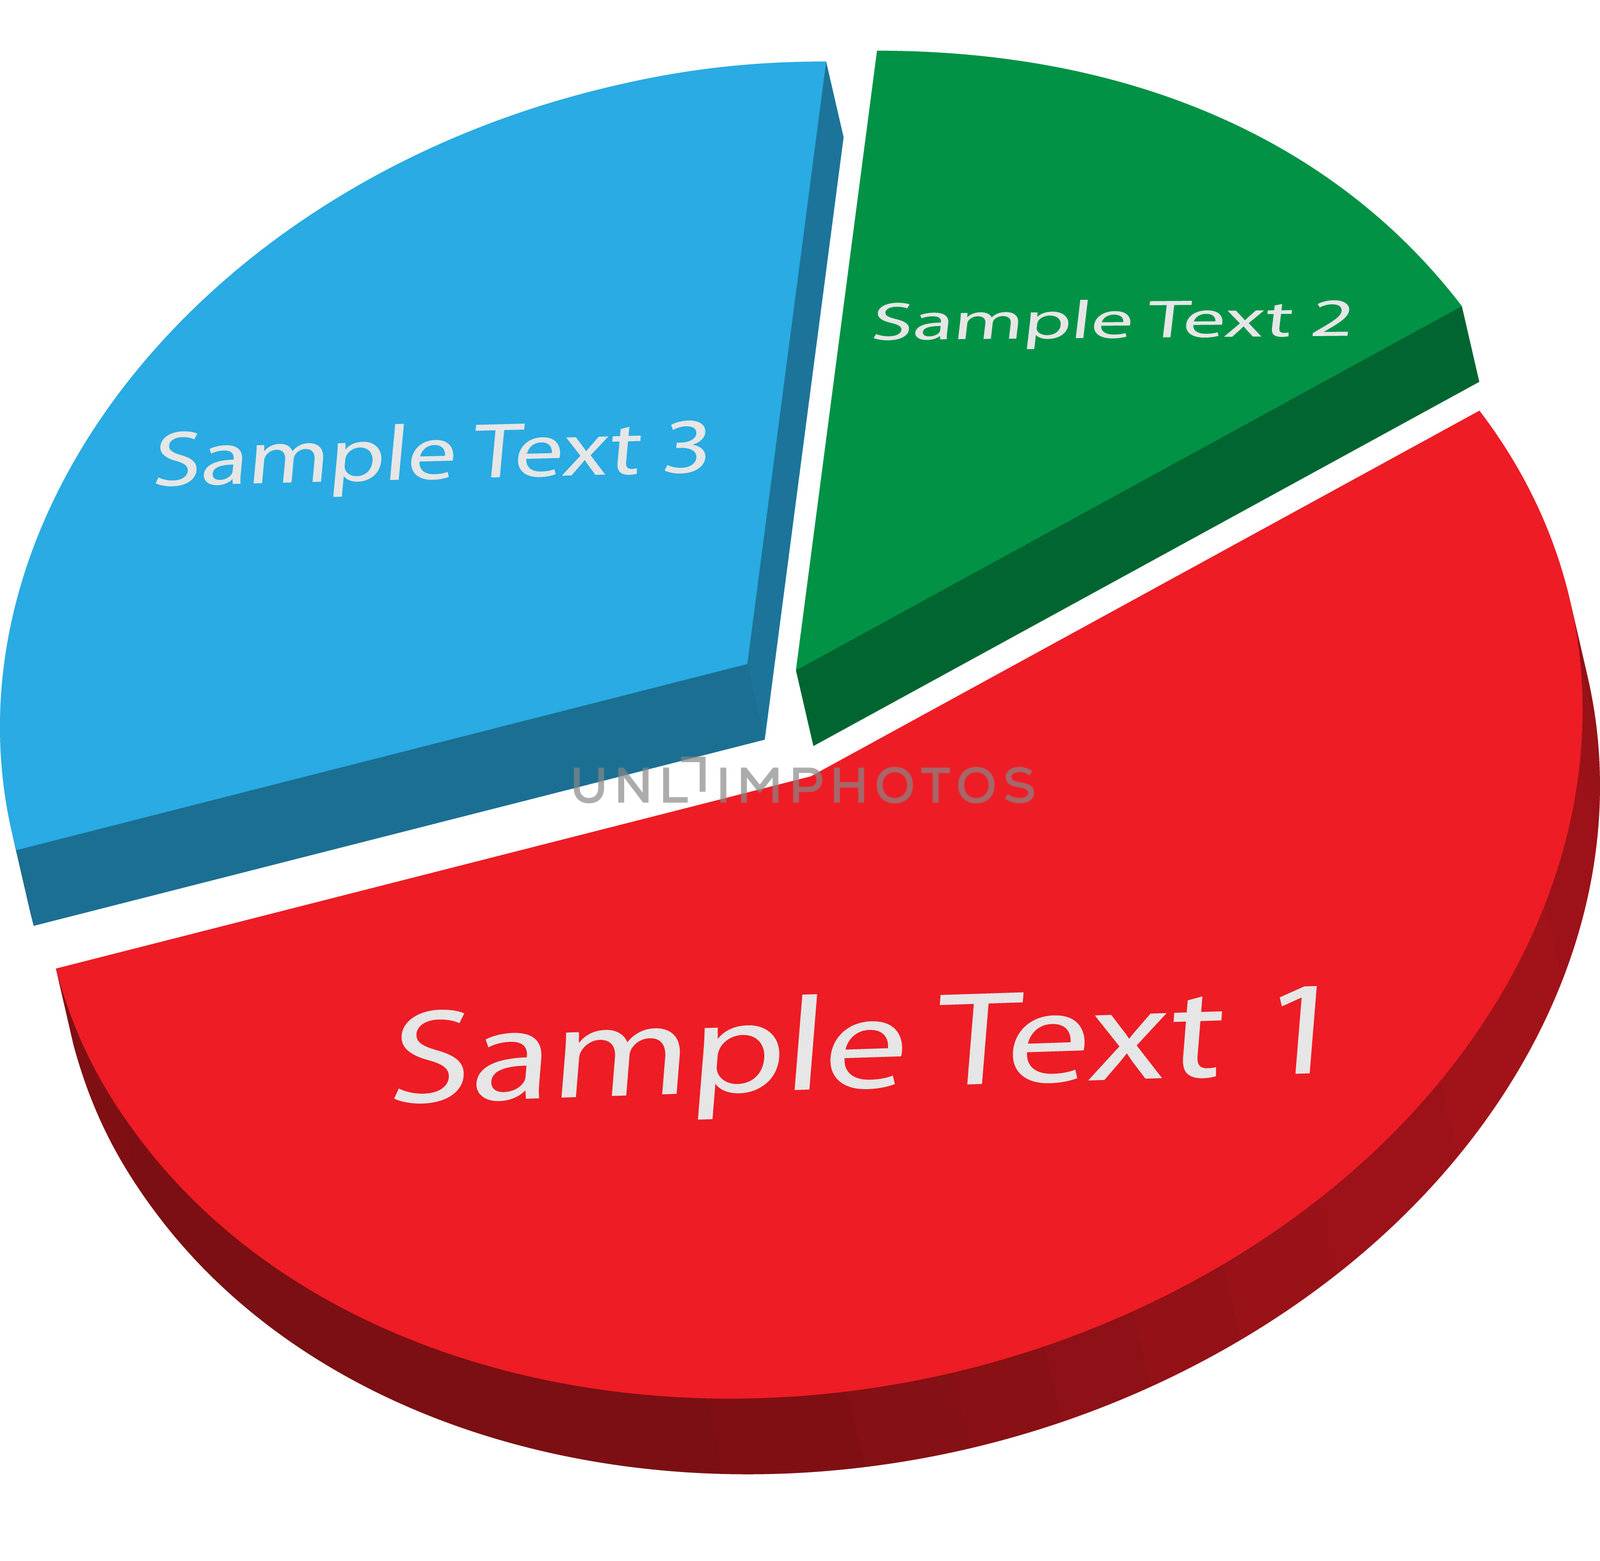 Image of a pie chart with editable text.